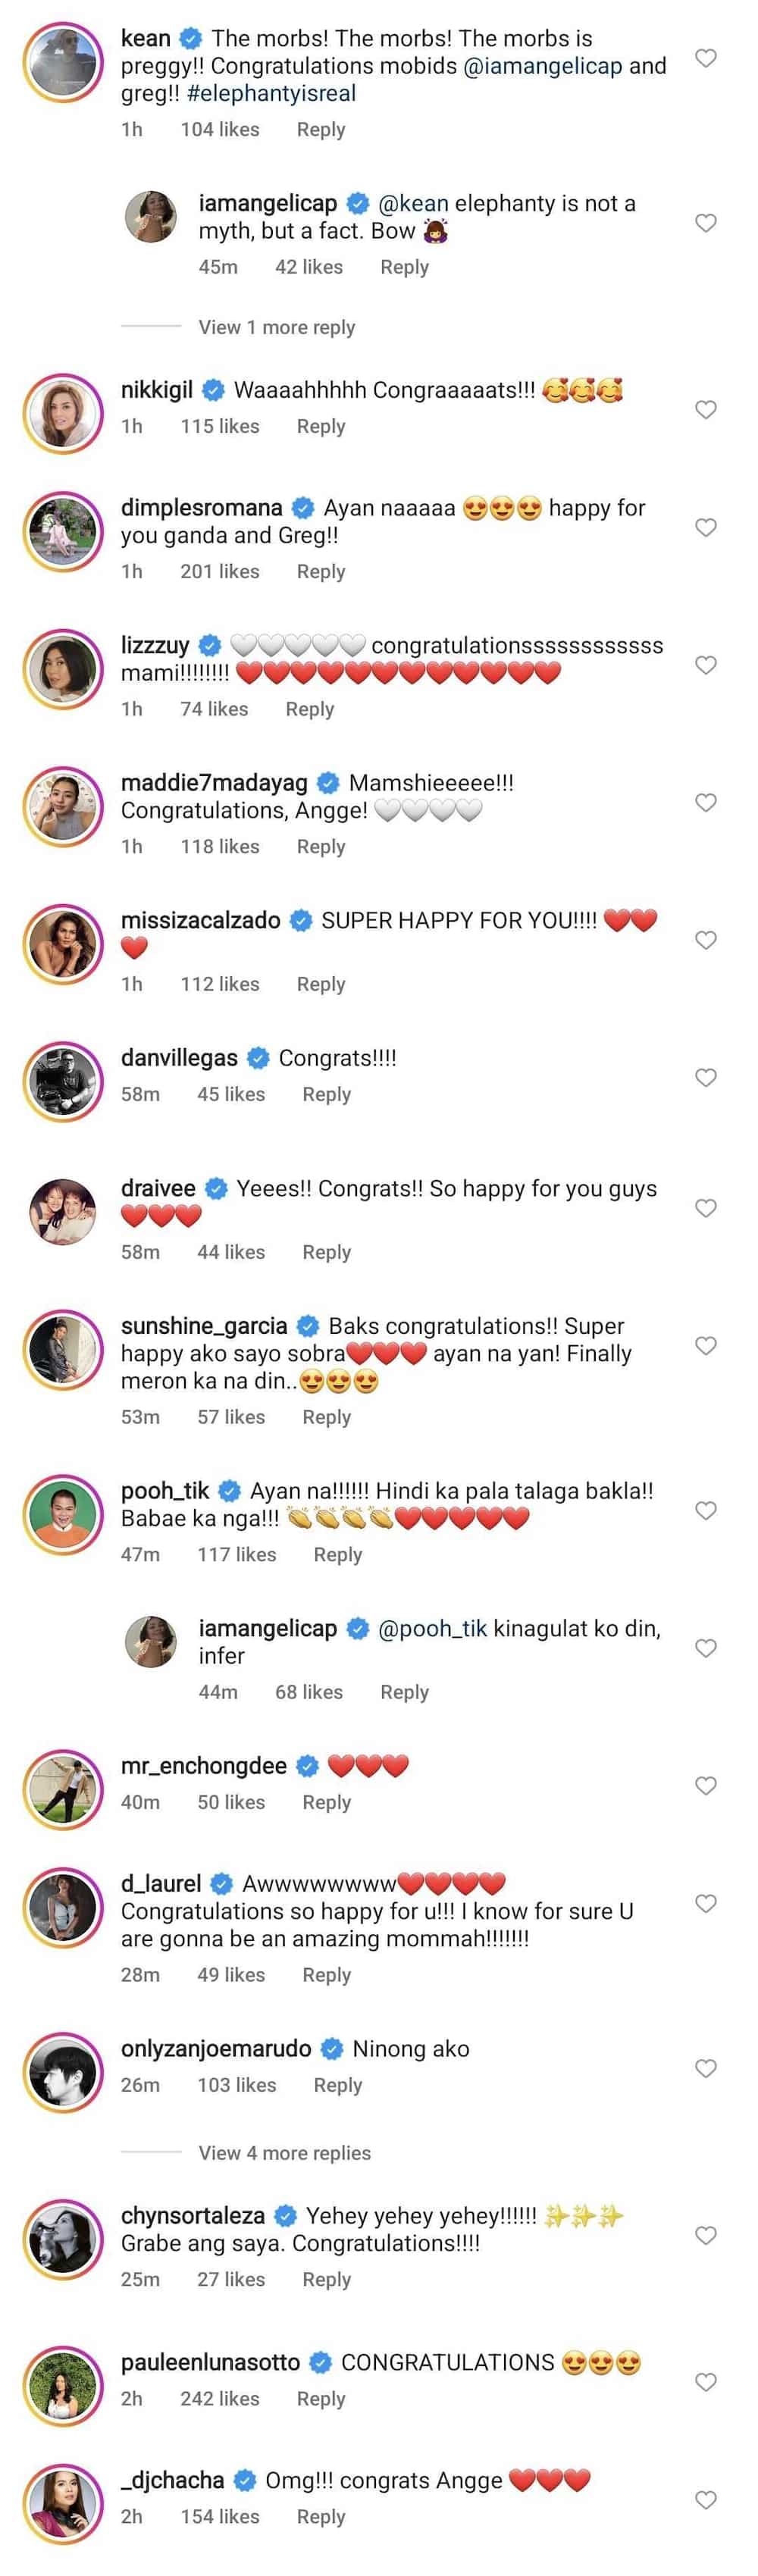 Celebrities react to Angelica Panganiban's pregnancy reveal on social media